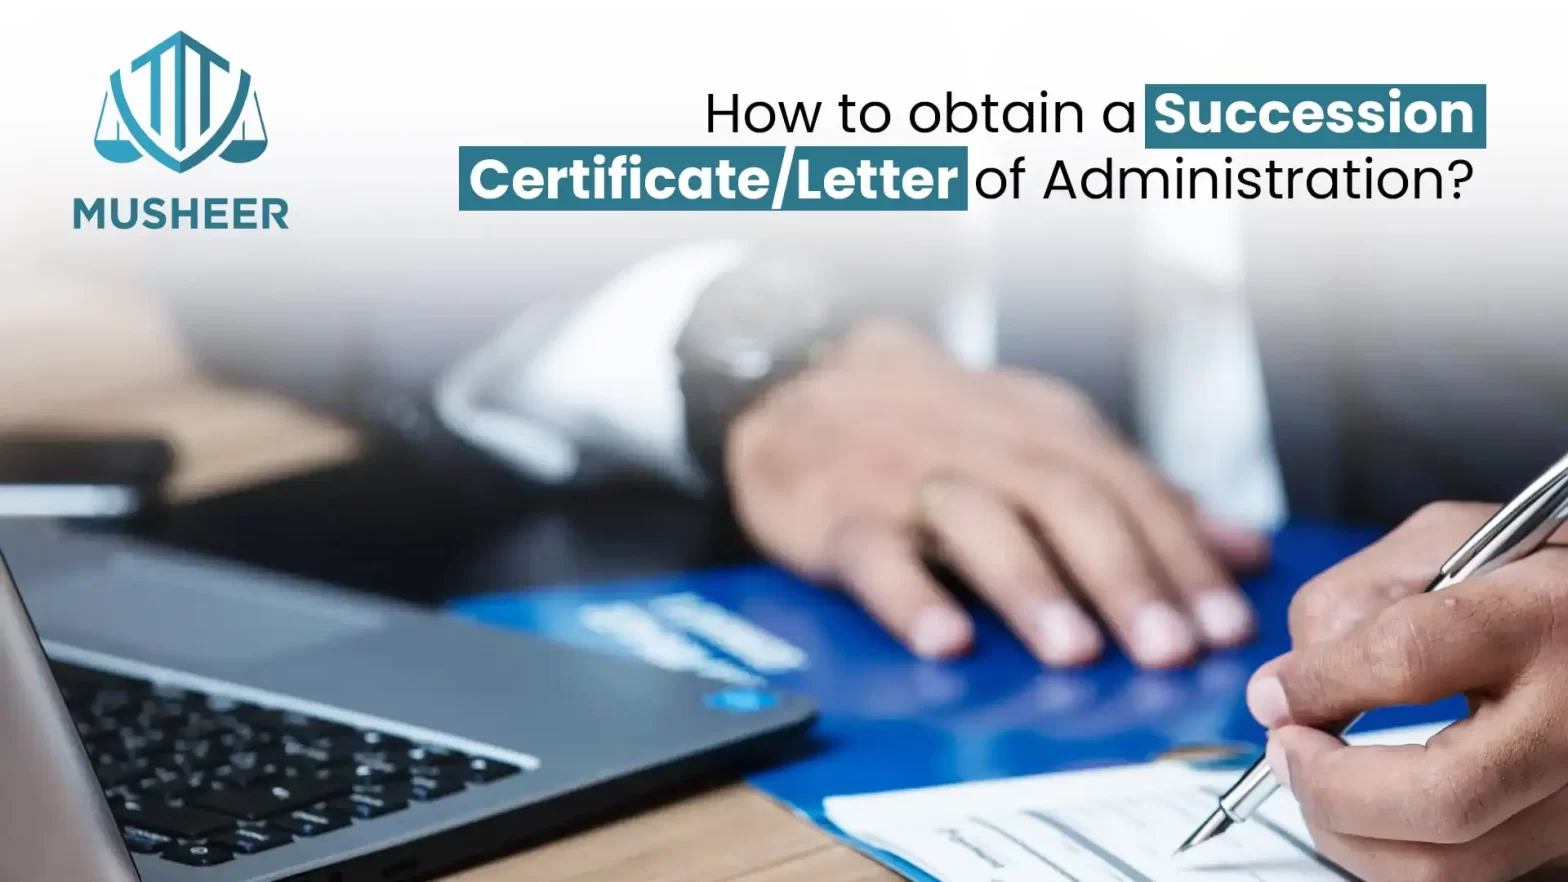 How to obtain a Succession Certificate